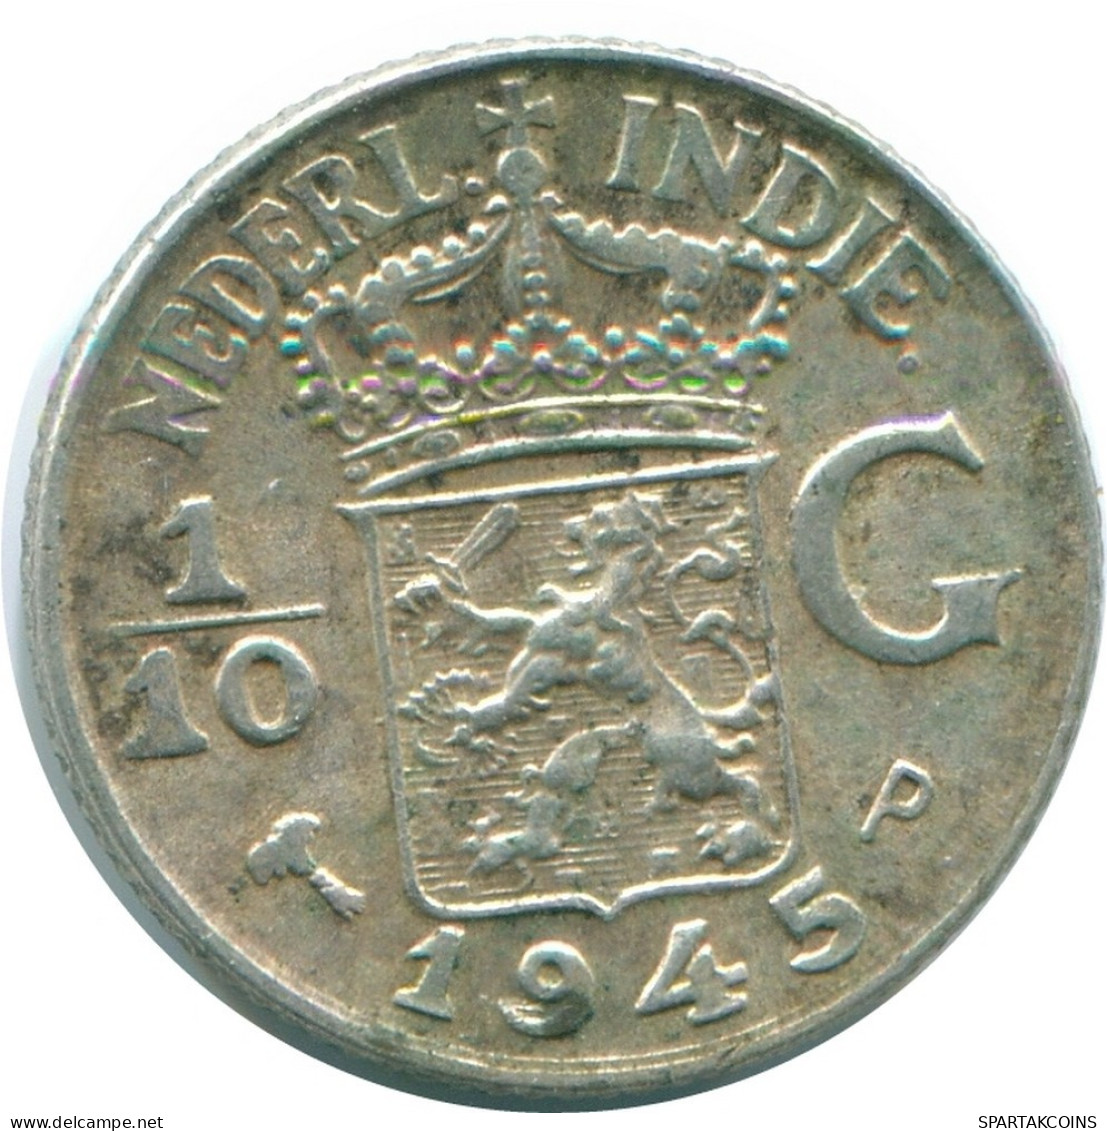 1/10 GULDEN 1945 P NETHERLANDS EAST INDIES SILVER Colonial Coin #NL14132.3.U.A - Indie Olandesi